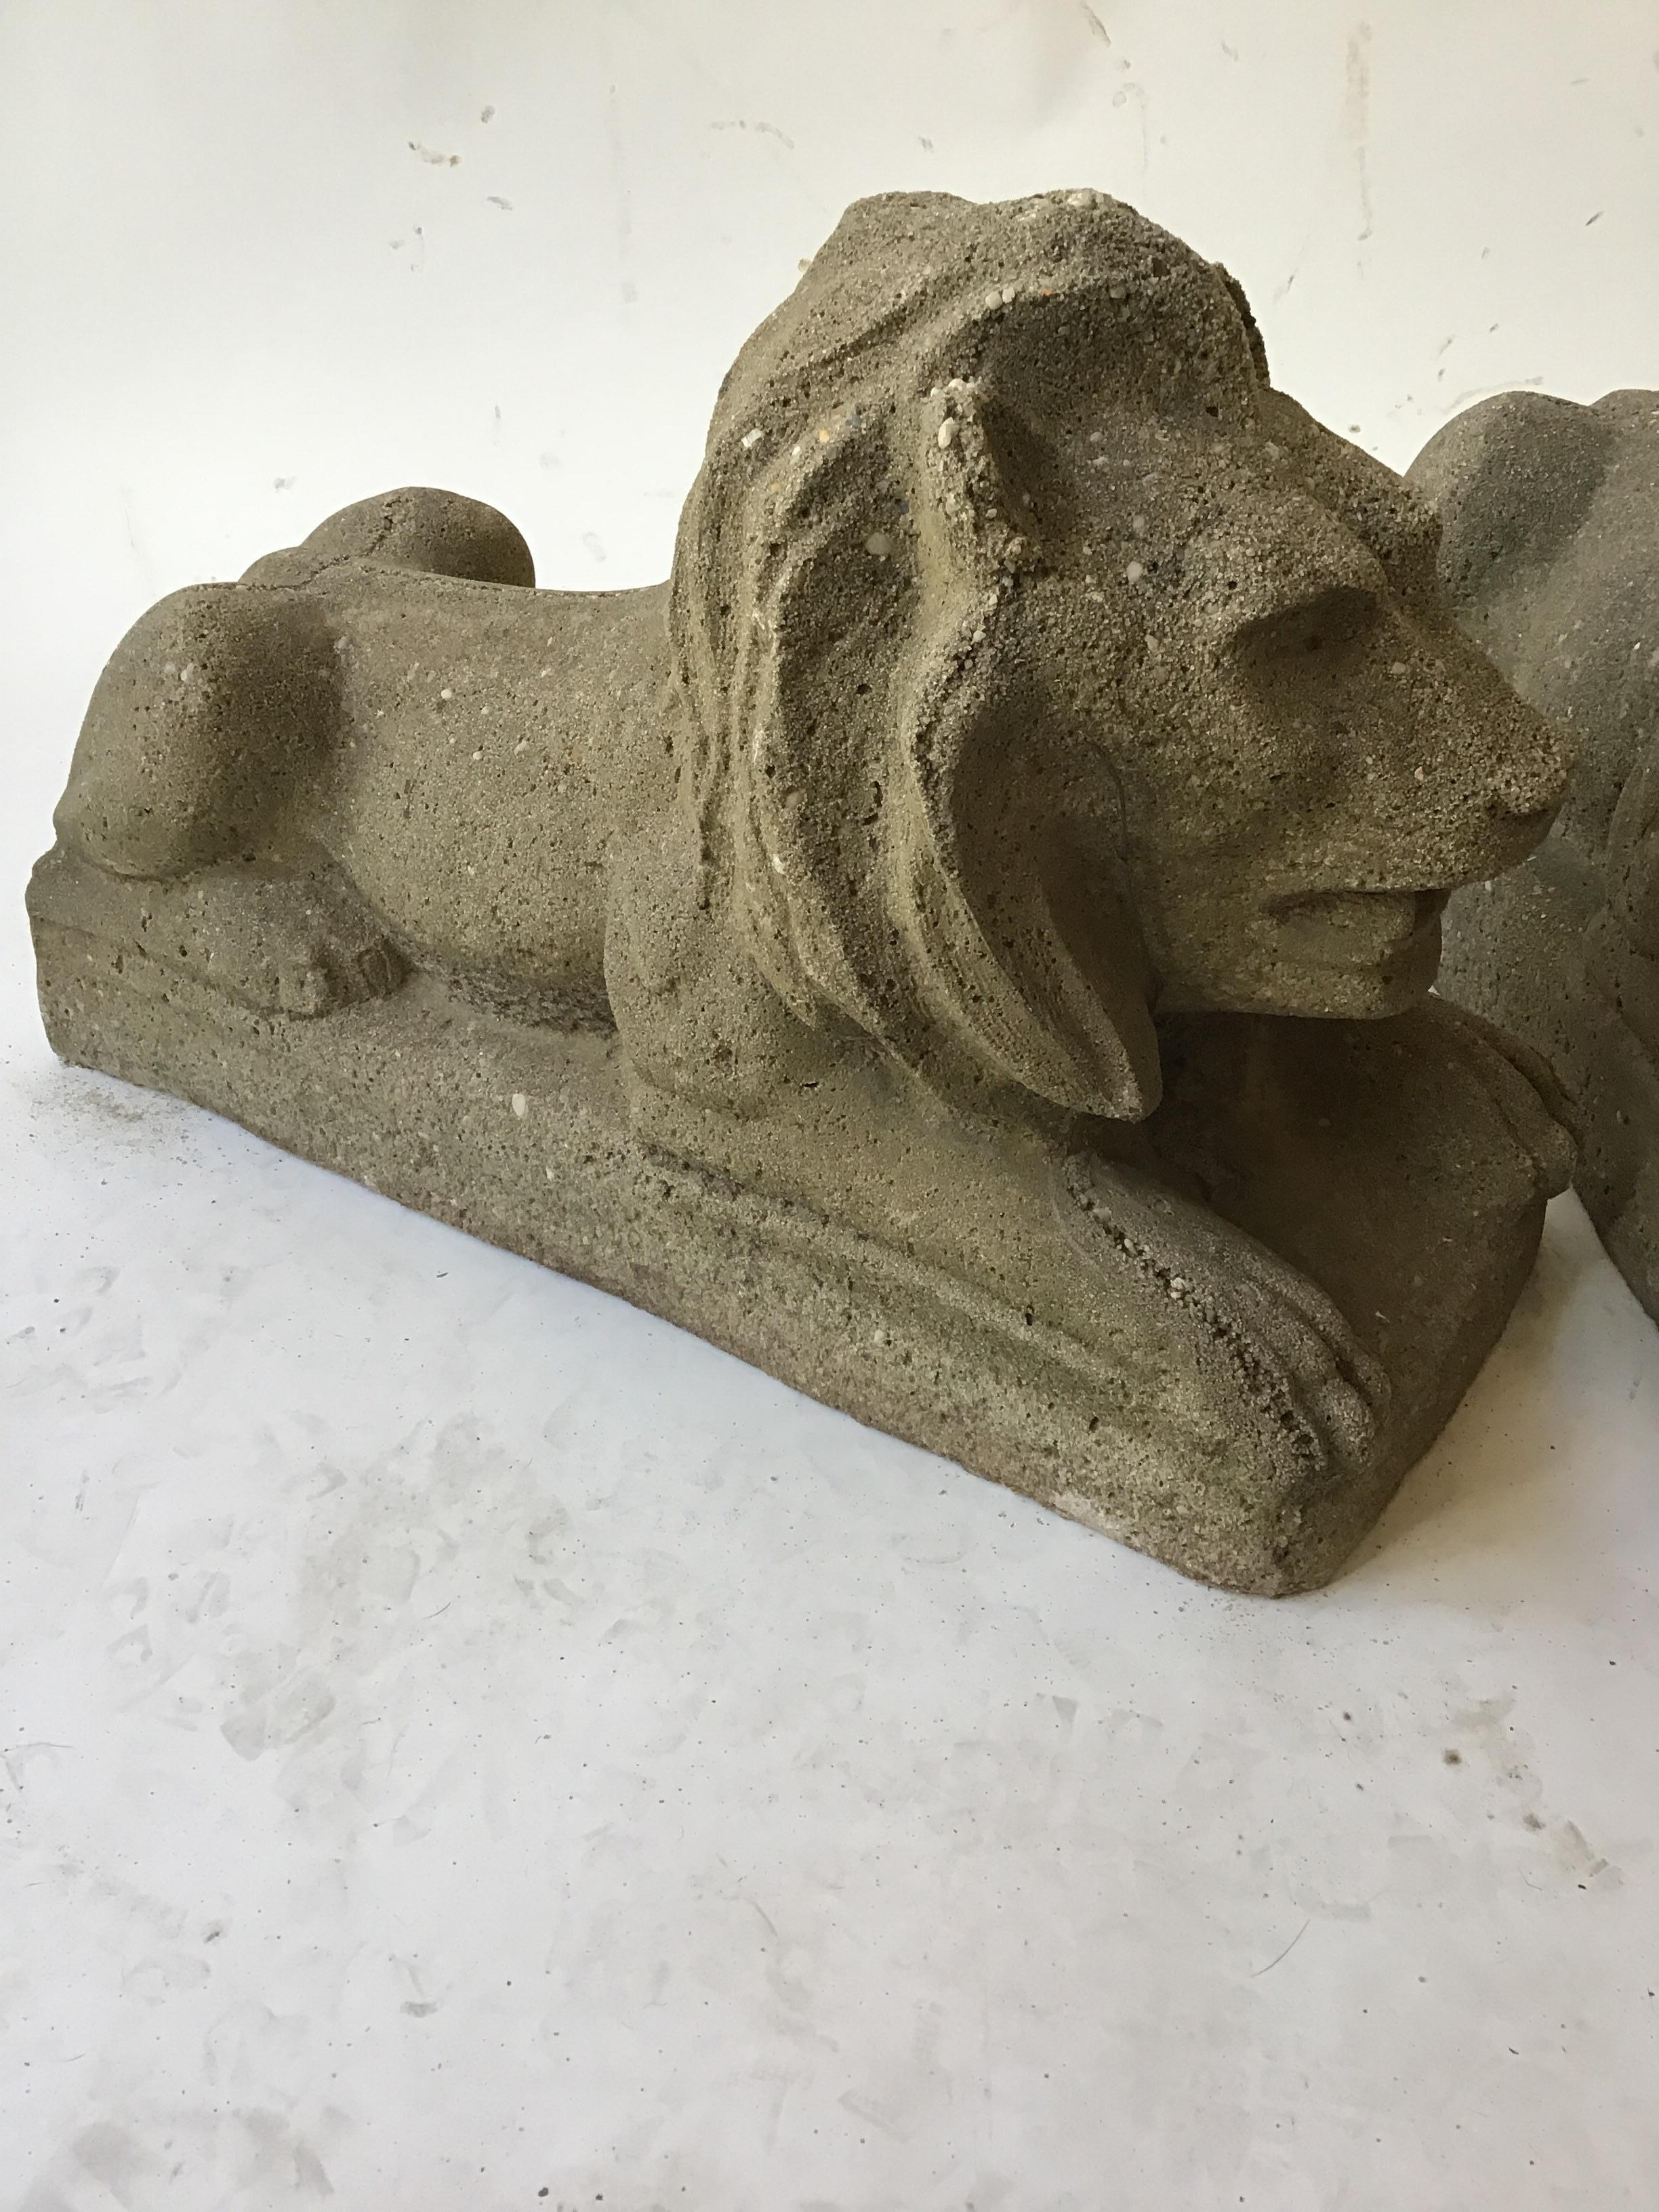 Pair of 1950s concrete lions. 4 available. Purchased from an East Hampton, NY estate. All are in similar condition. If you’d like, you can choose which 2 to purchase, if not buying all 4.